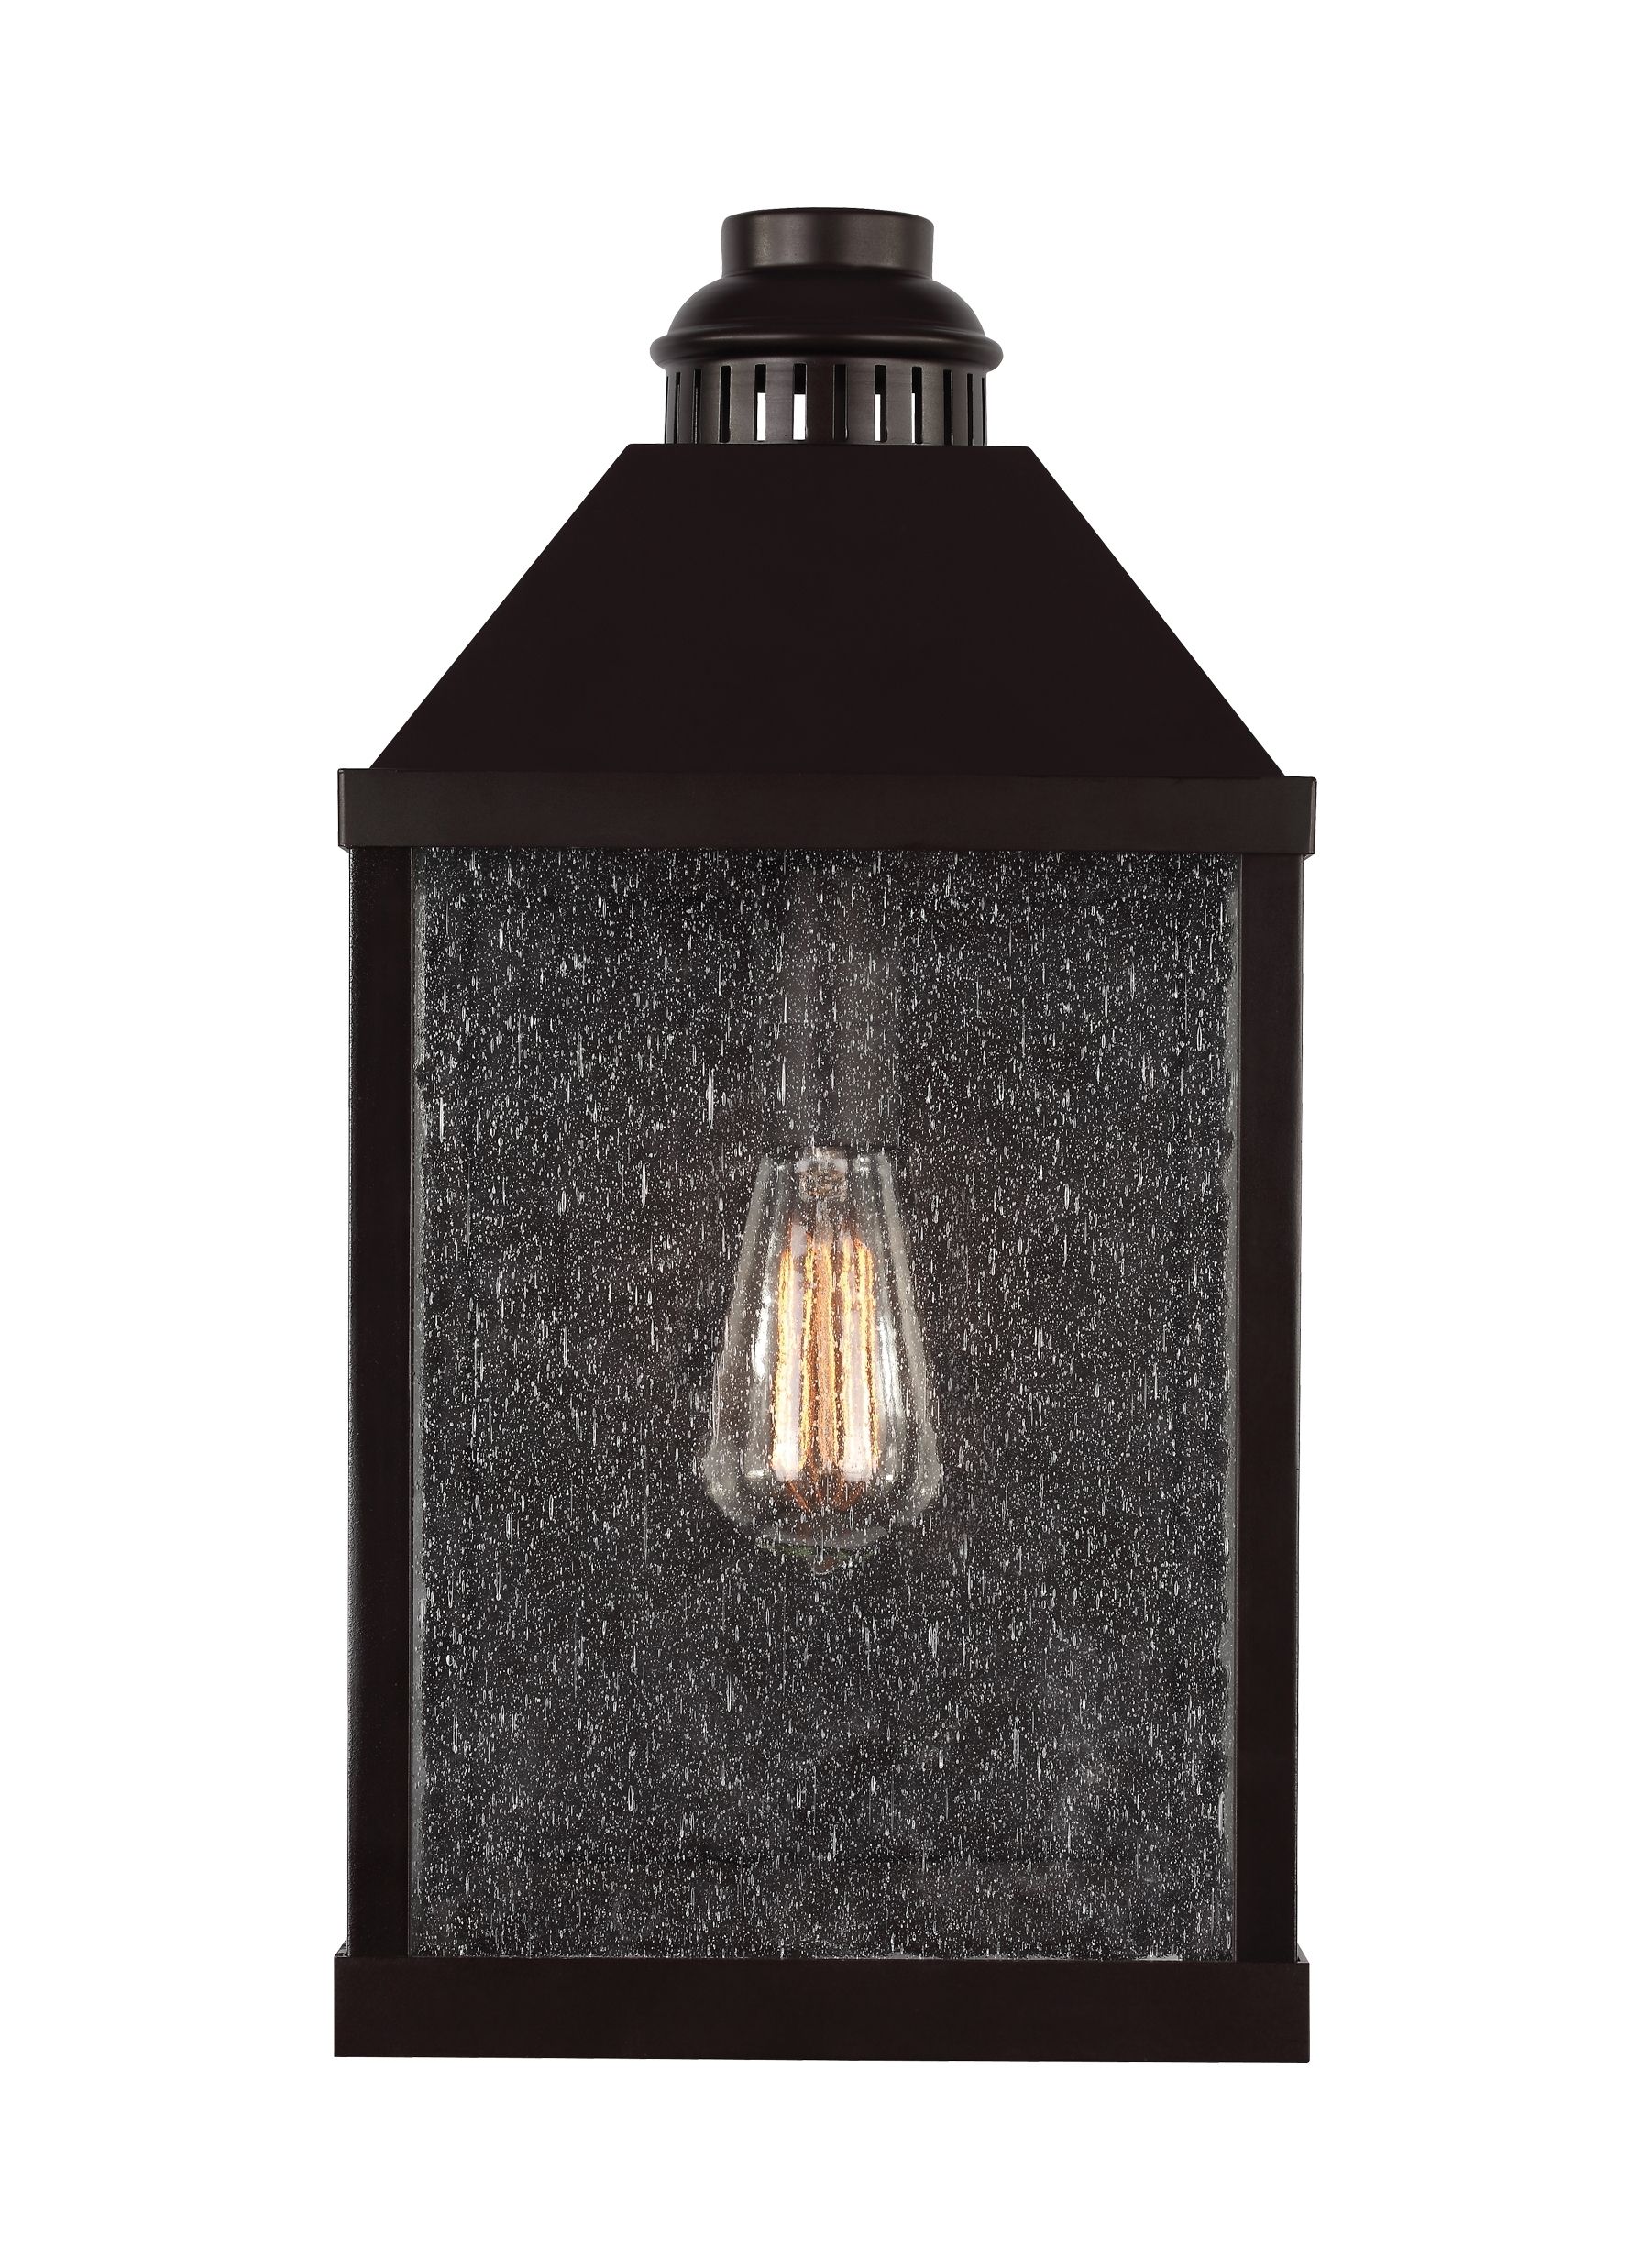 Light Fixtures Rustic Wall Sconce Fixture Lodge Style Sconces Inside Rustic Outdoor Electric Lanterns (View 11 of 20)